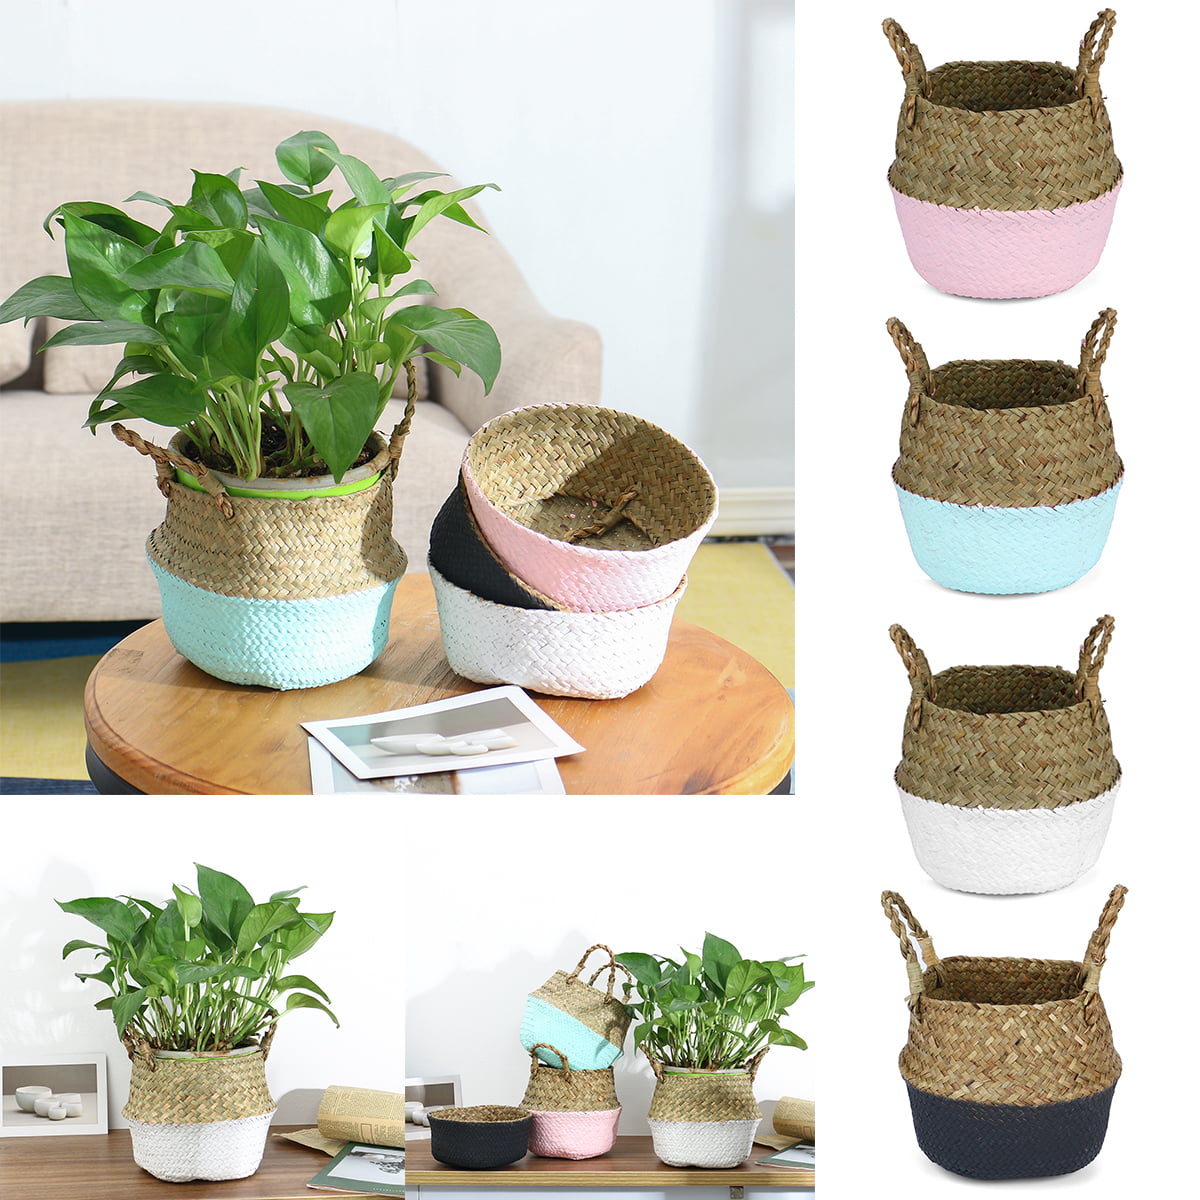 SEAGRASS BELLY BASKET STORAGE PLANT POT FOLDABLE NURSERY LAUNDRY BAG ROOM STRICT 